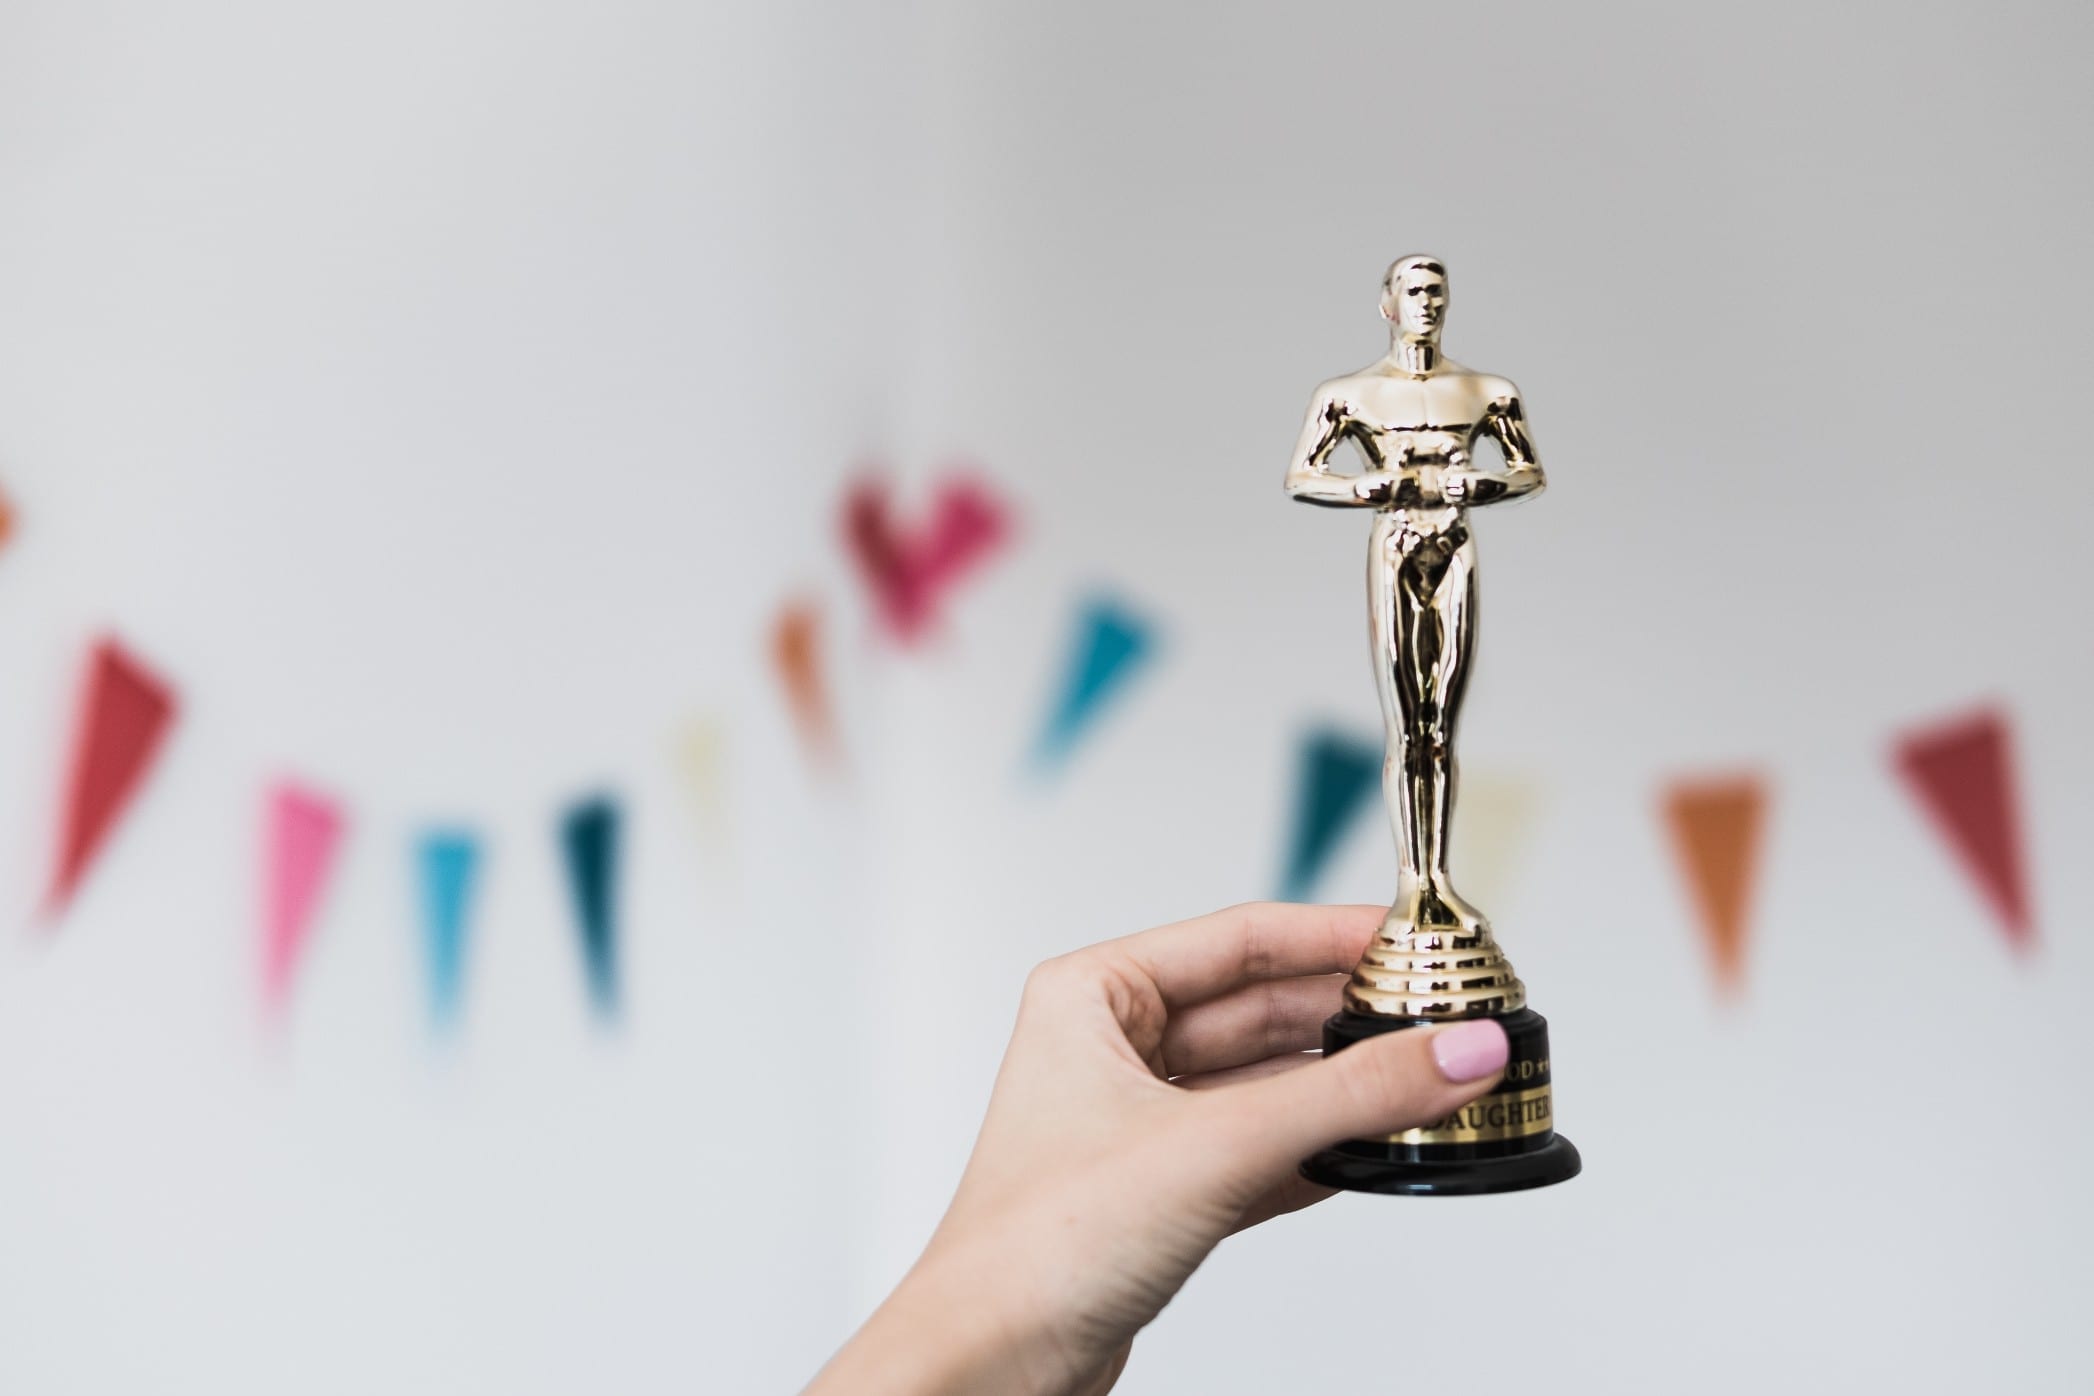 Oscars 2020 - Nominations For Short Films Announced - Short Film Festival News - Indie Shorts Mag